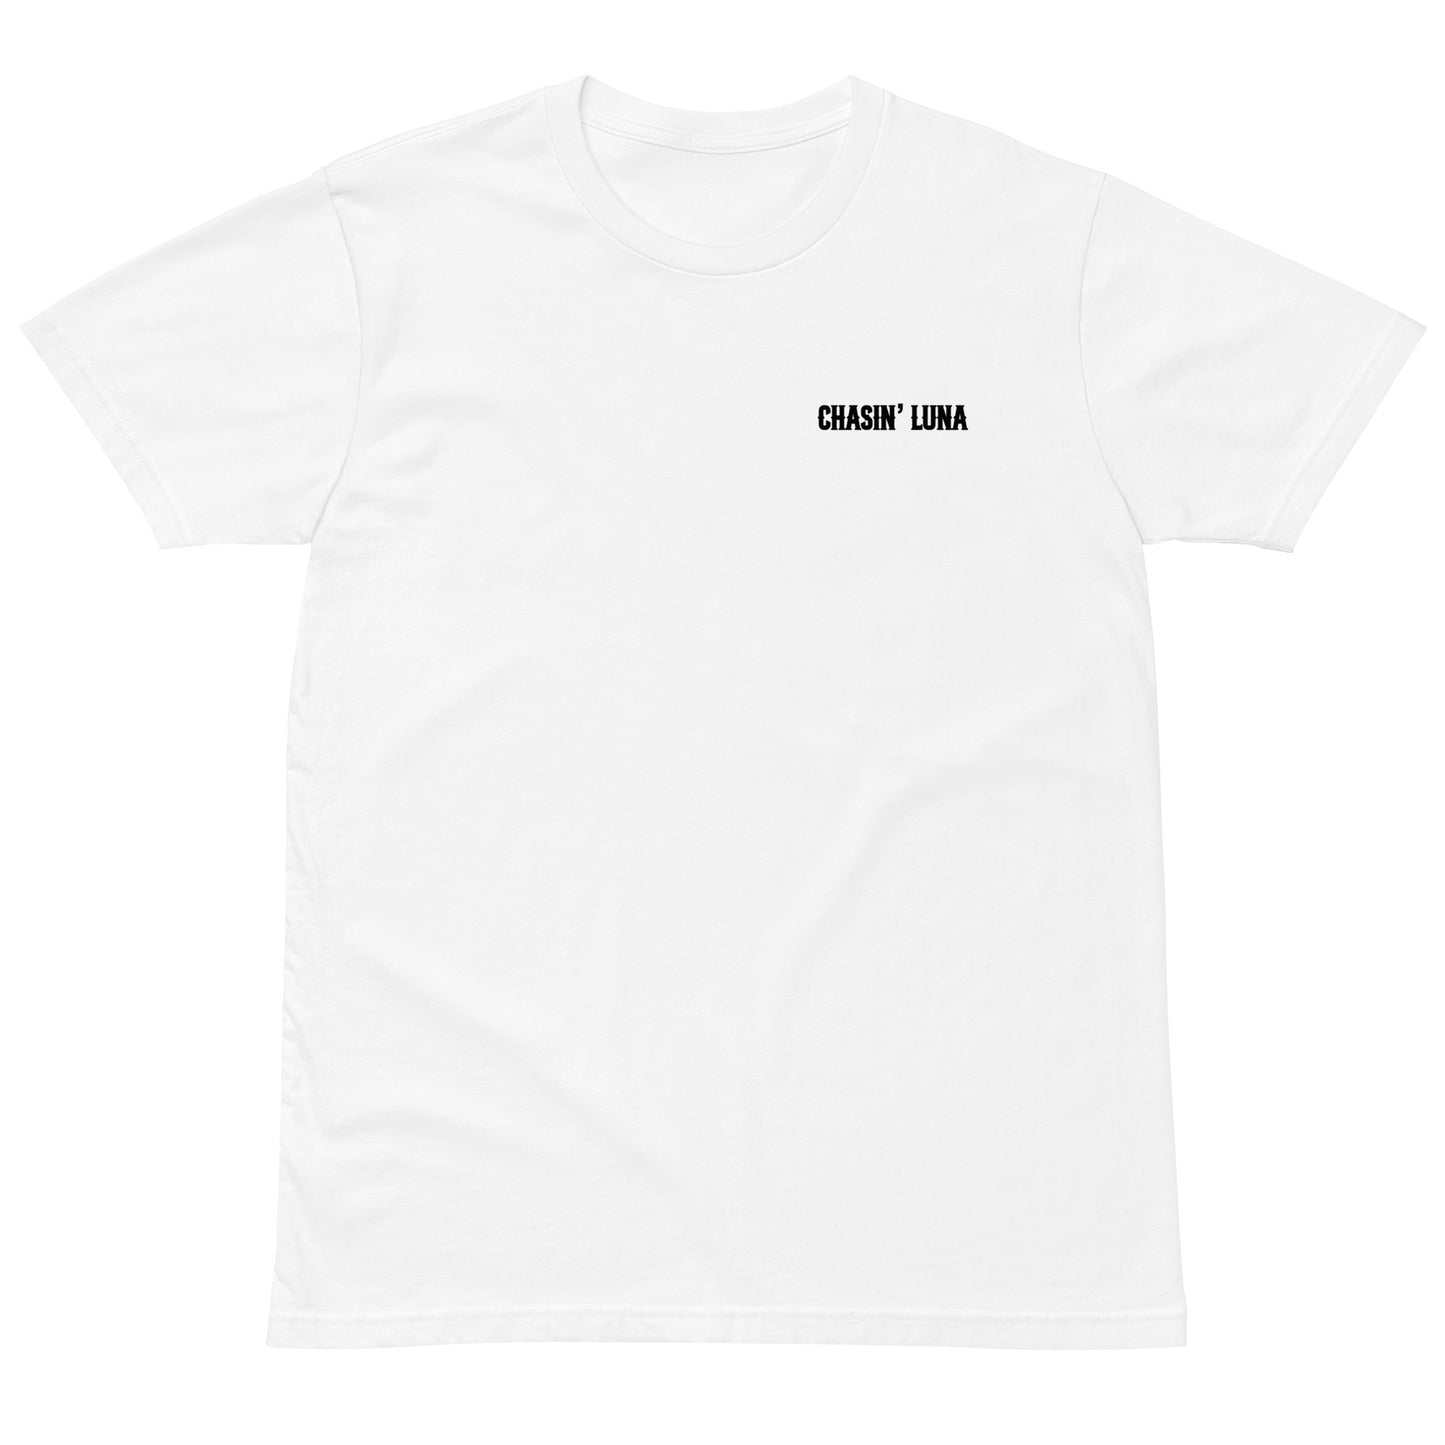 Numb To The Lights Tshirt